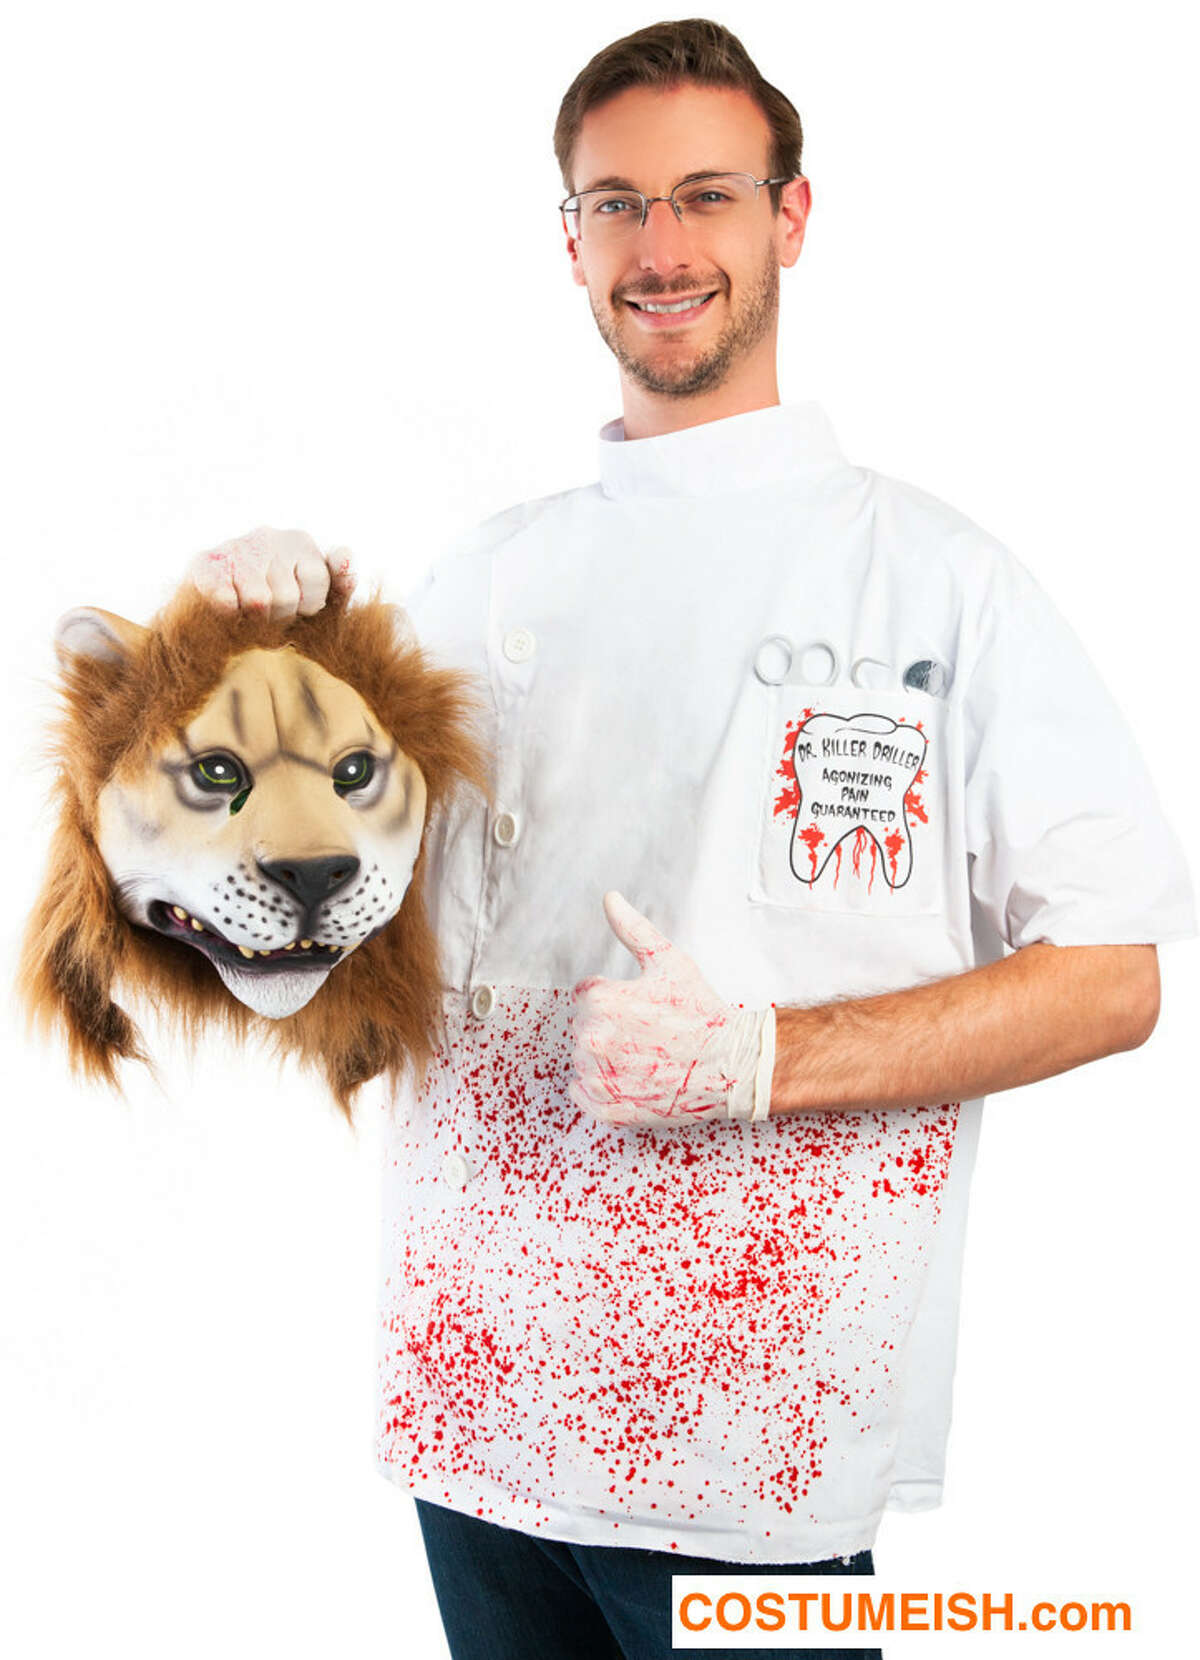 California-based costume company Costumeish.com is selling a Lion Killer Dentist costume for $59.99, making light of the Minnesota dentist Walter Palmer who made national news after killing a beloved lion in Zimbabwe.